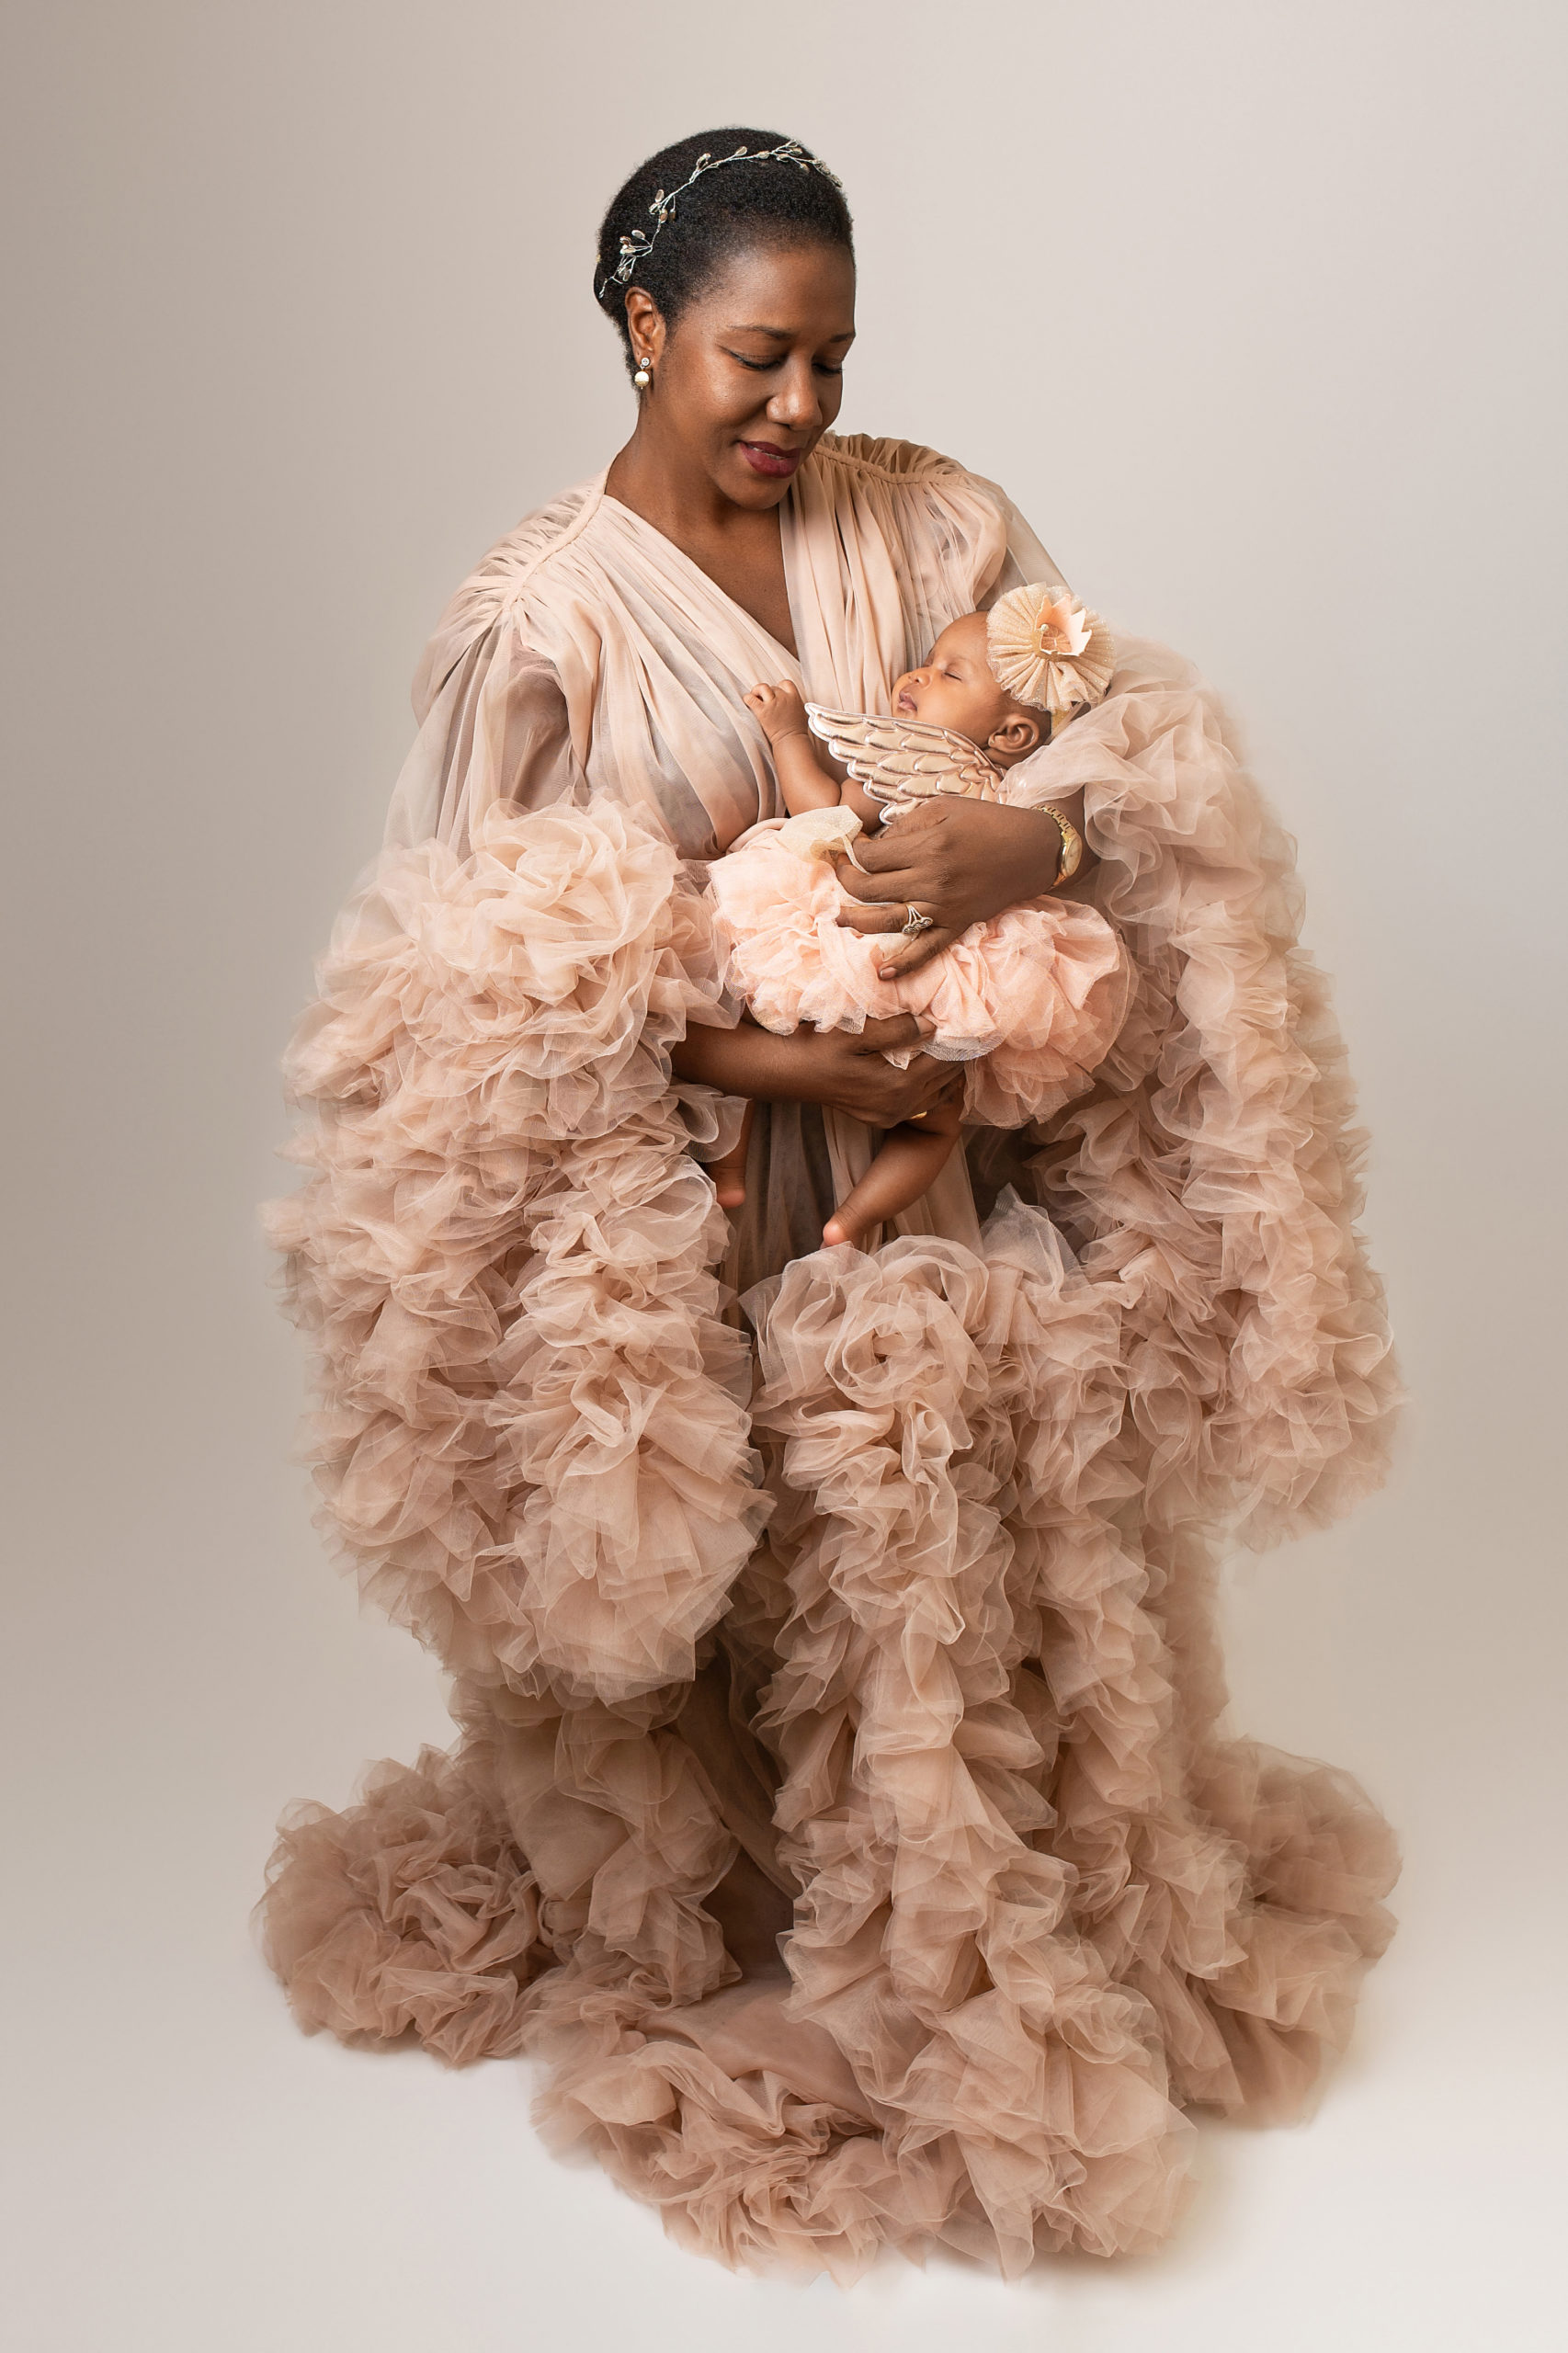 new mom in tan tulle maternity robe holding her newborn